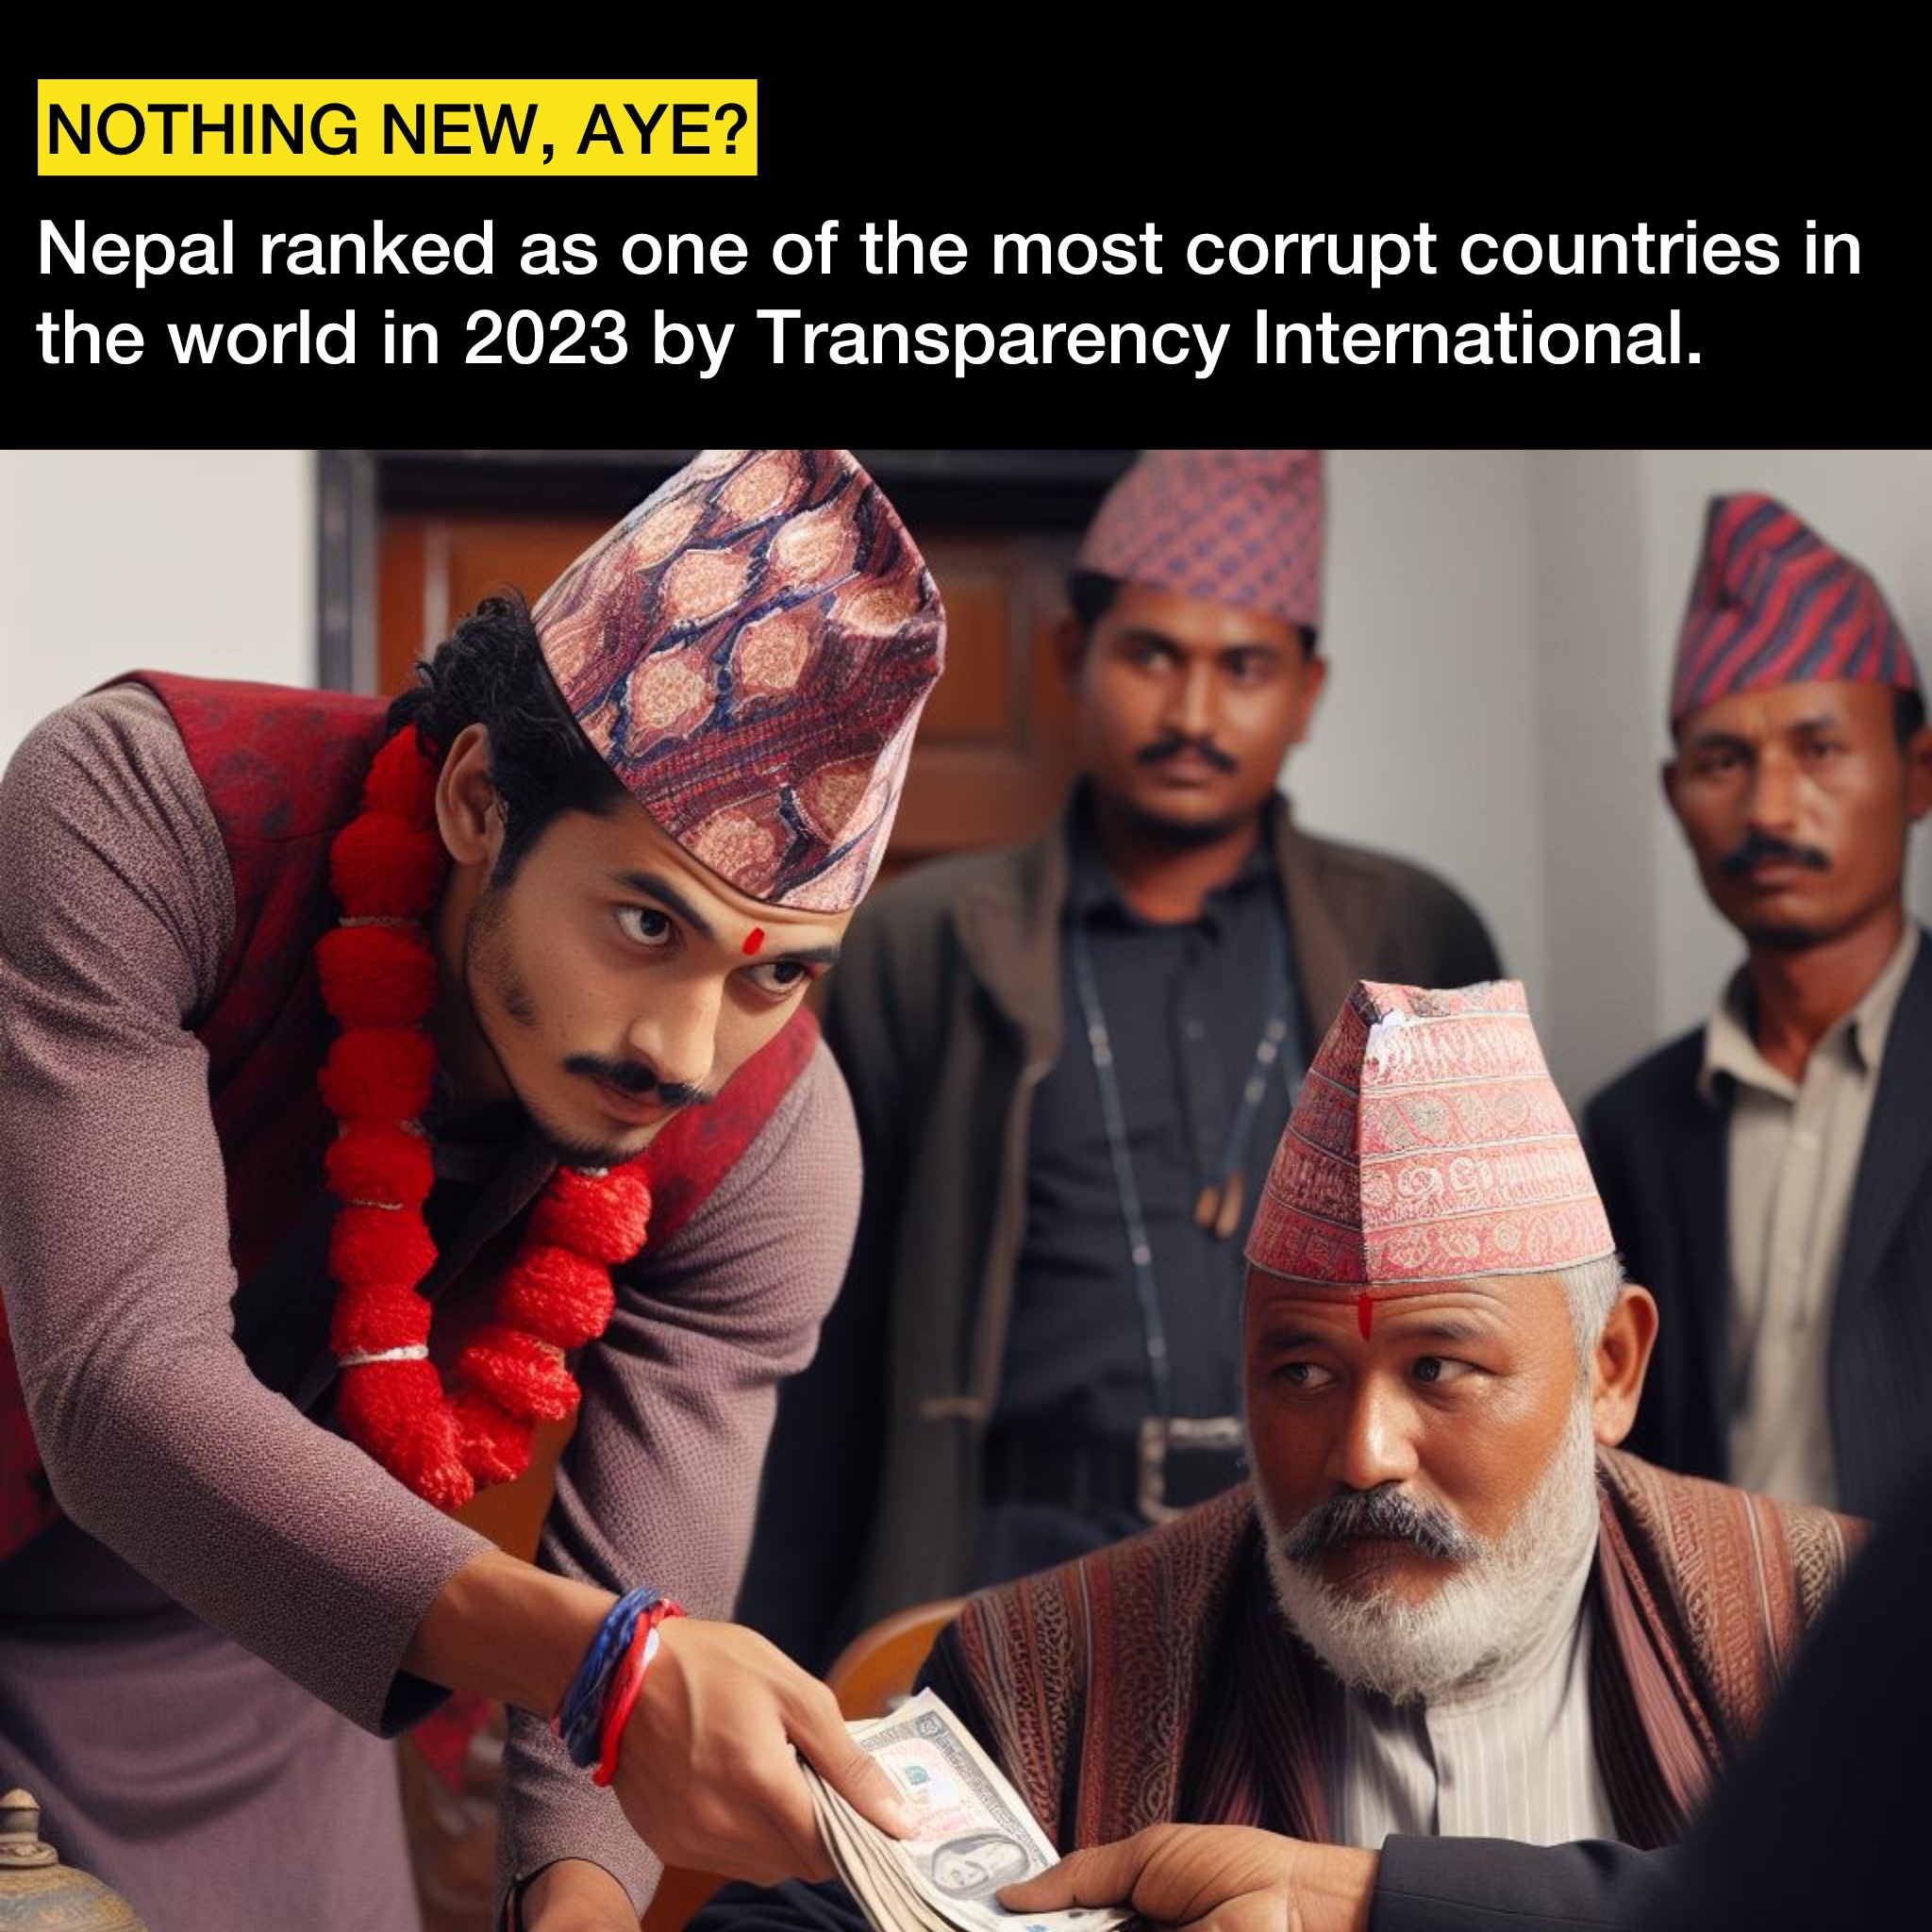 Nepal Ranked One of the Most Corrupt Countries in the World